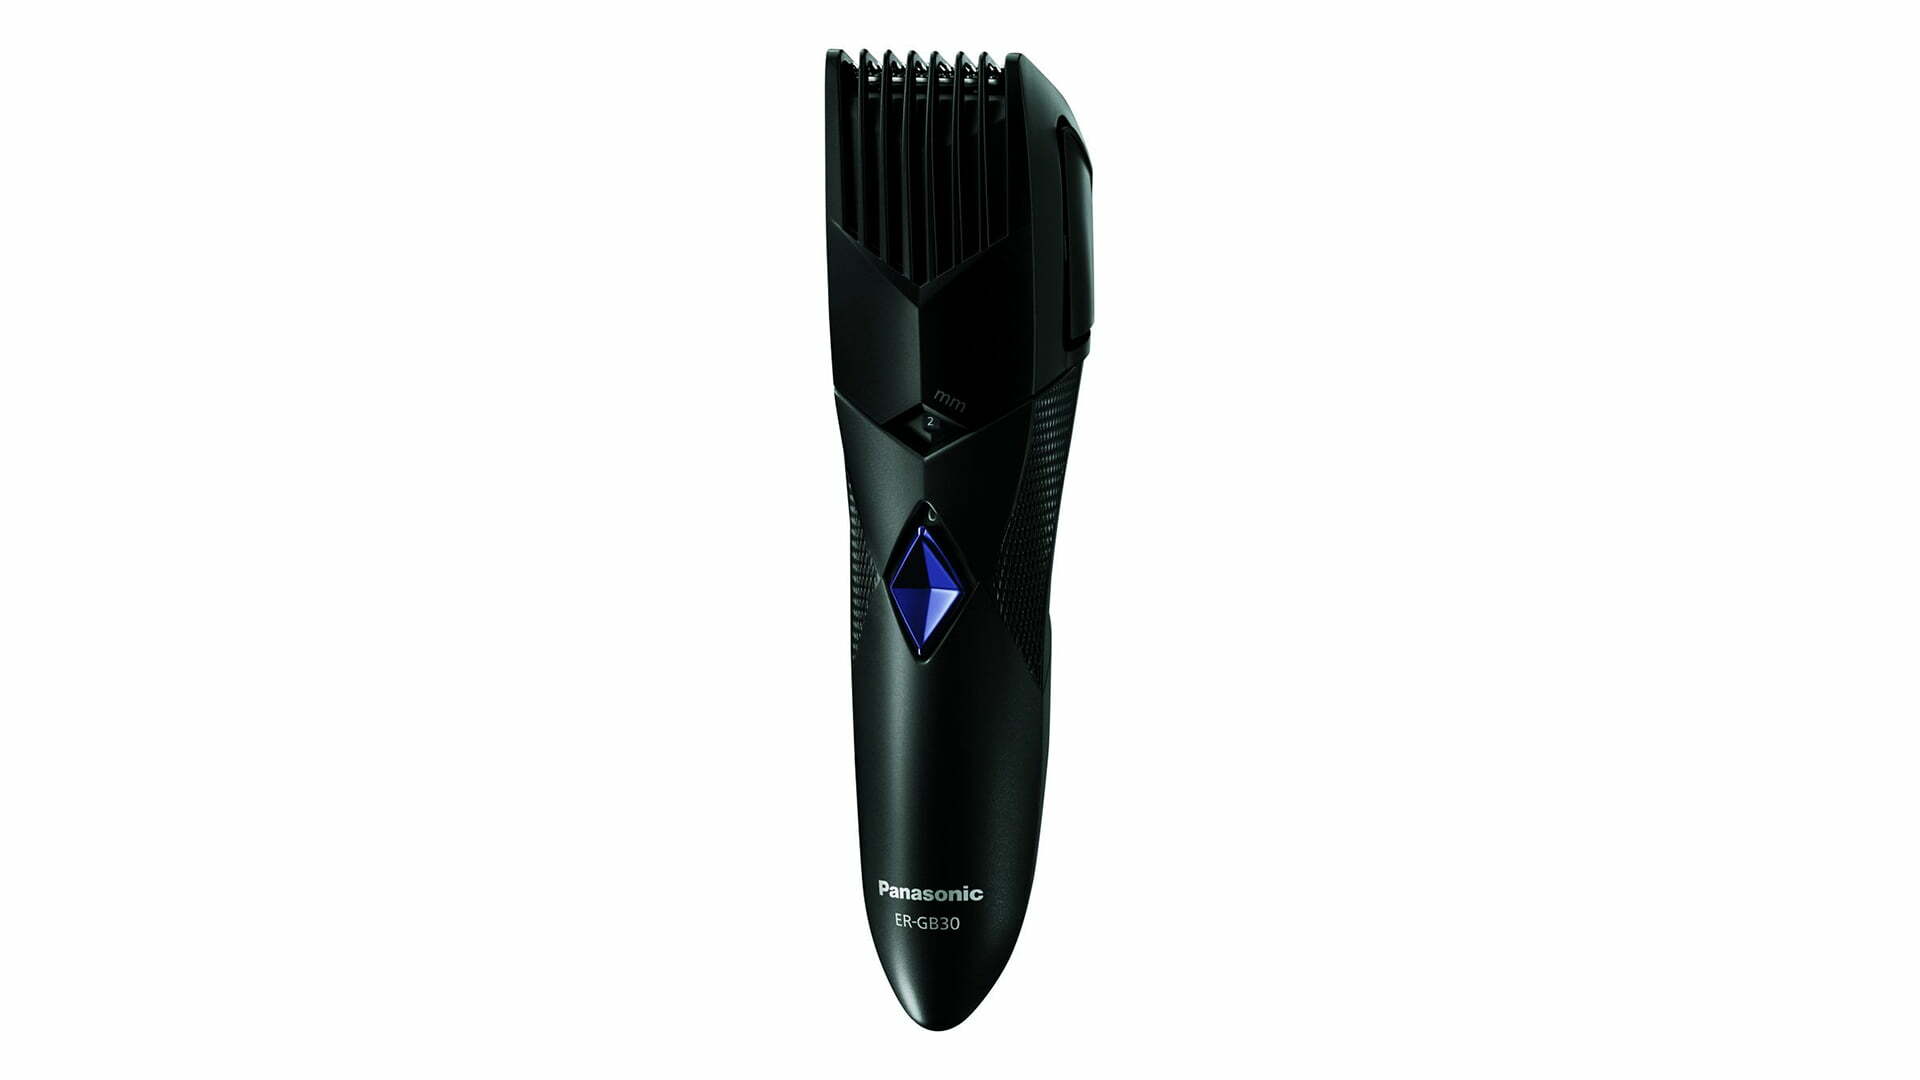 Panasonic ER-GB30-K44B Battery Operated Trimmer Review